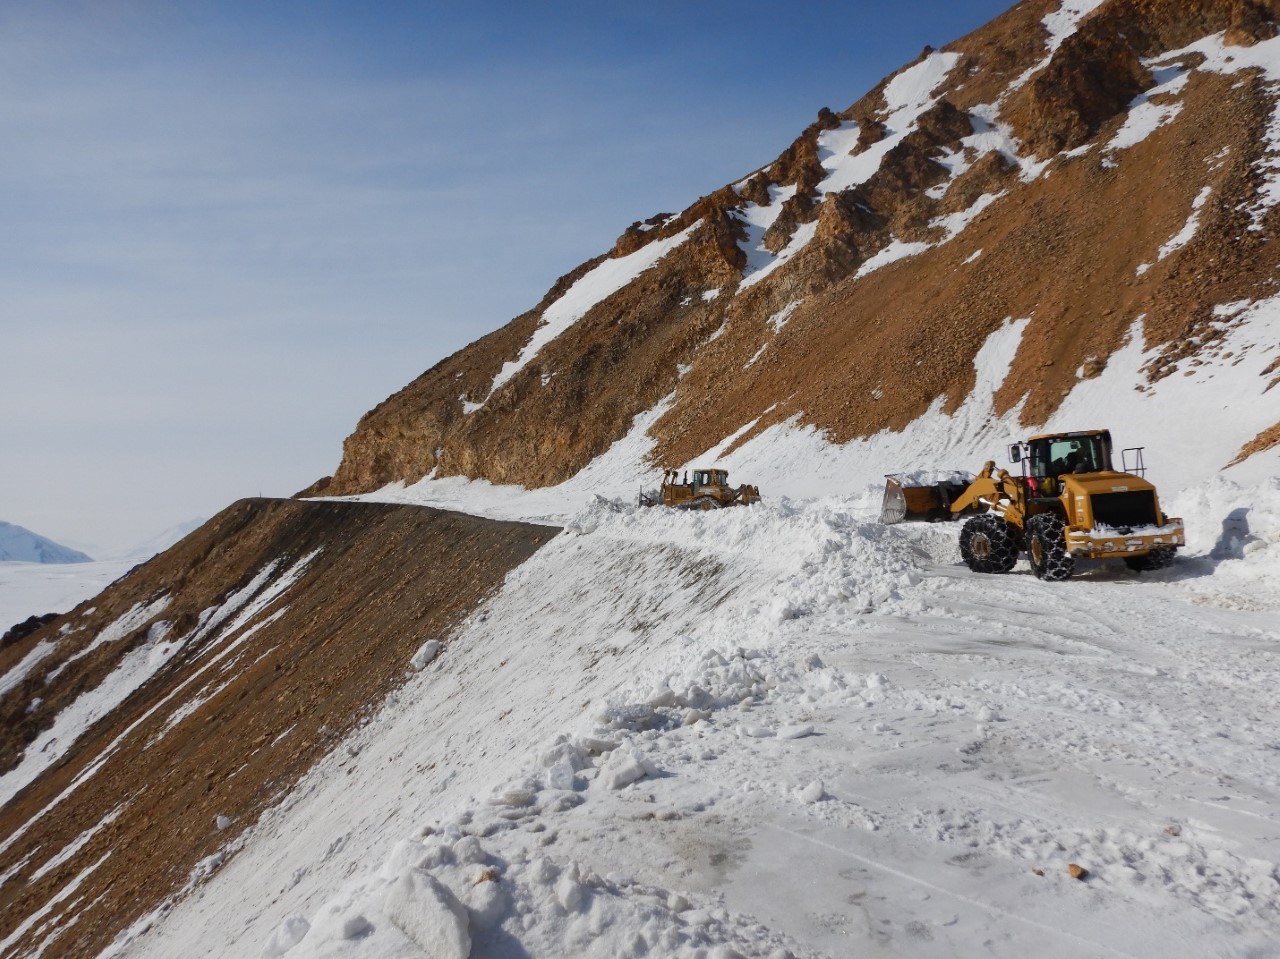 Two large plows clear snow from a narrow road set on the side of a steep mountain. Orange, red, and brown rocks make up the mountain where it's not covered by snow.